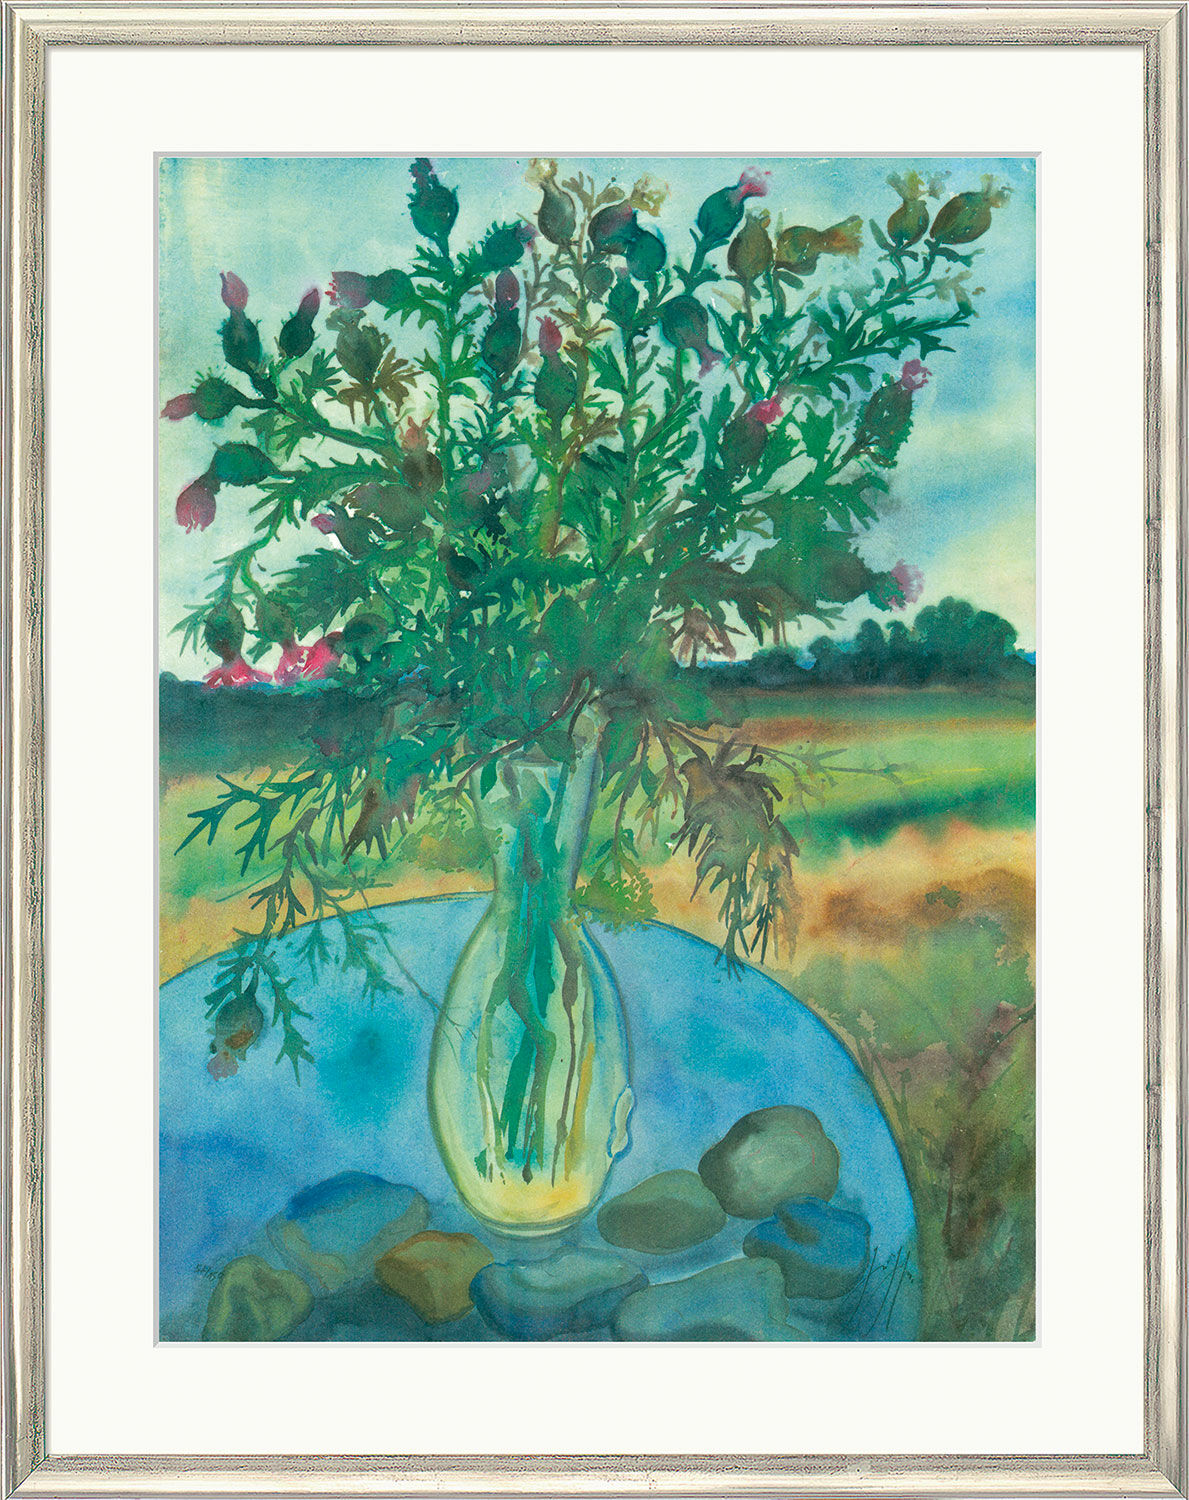 Picture "Thistles" (2002), framed by Günter Grass